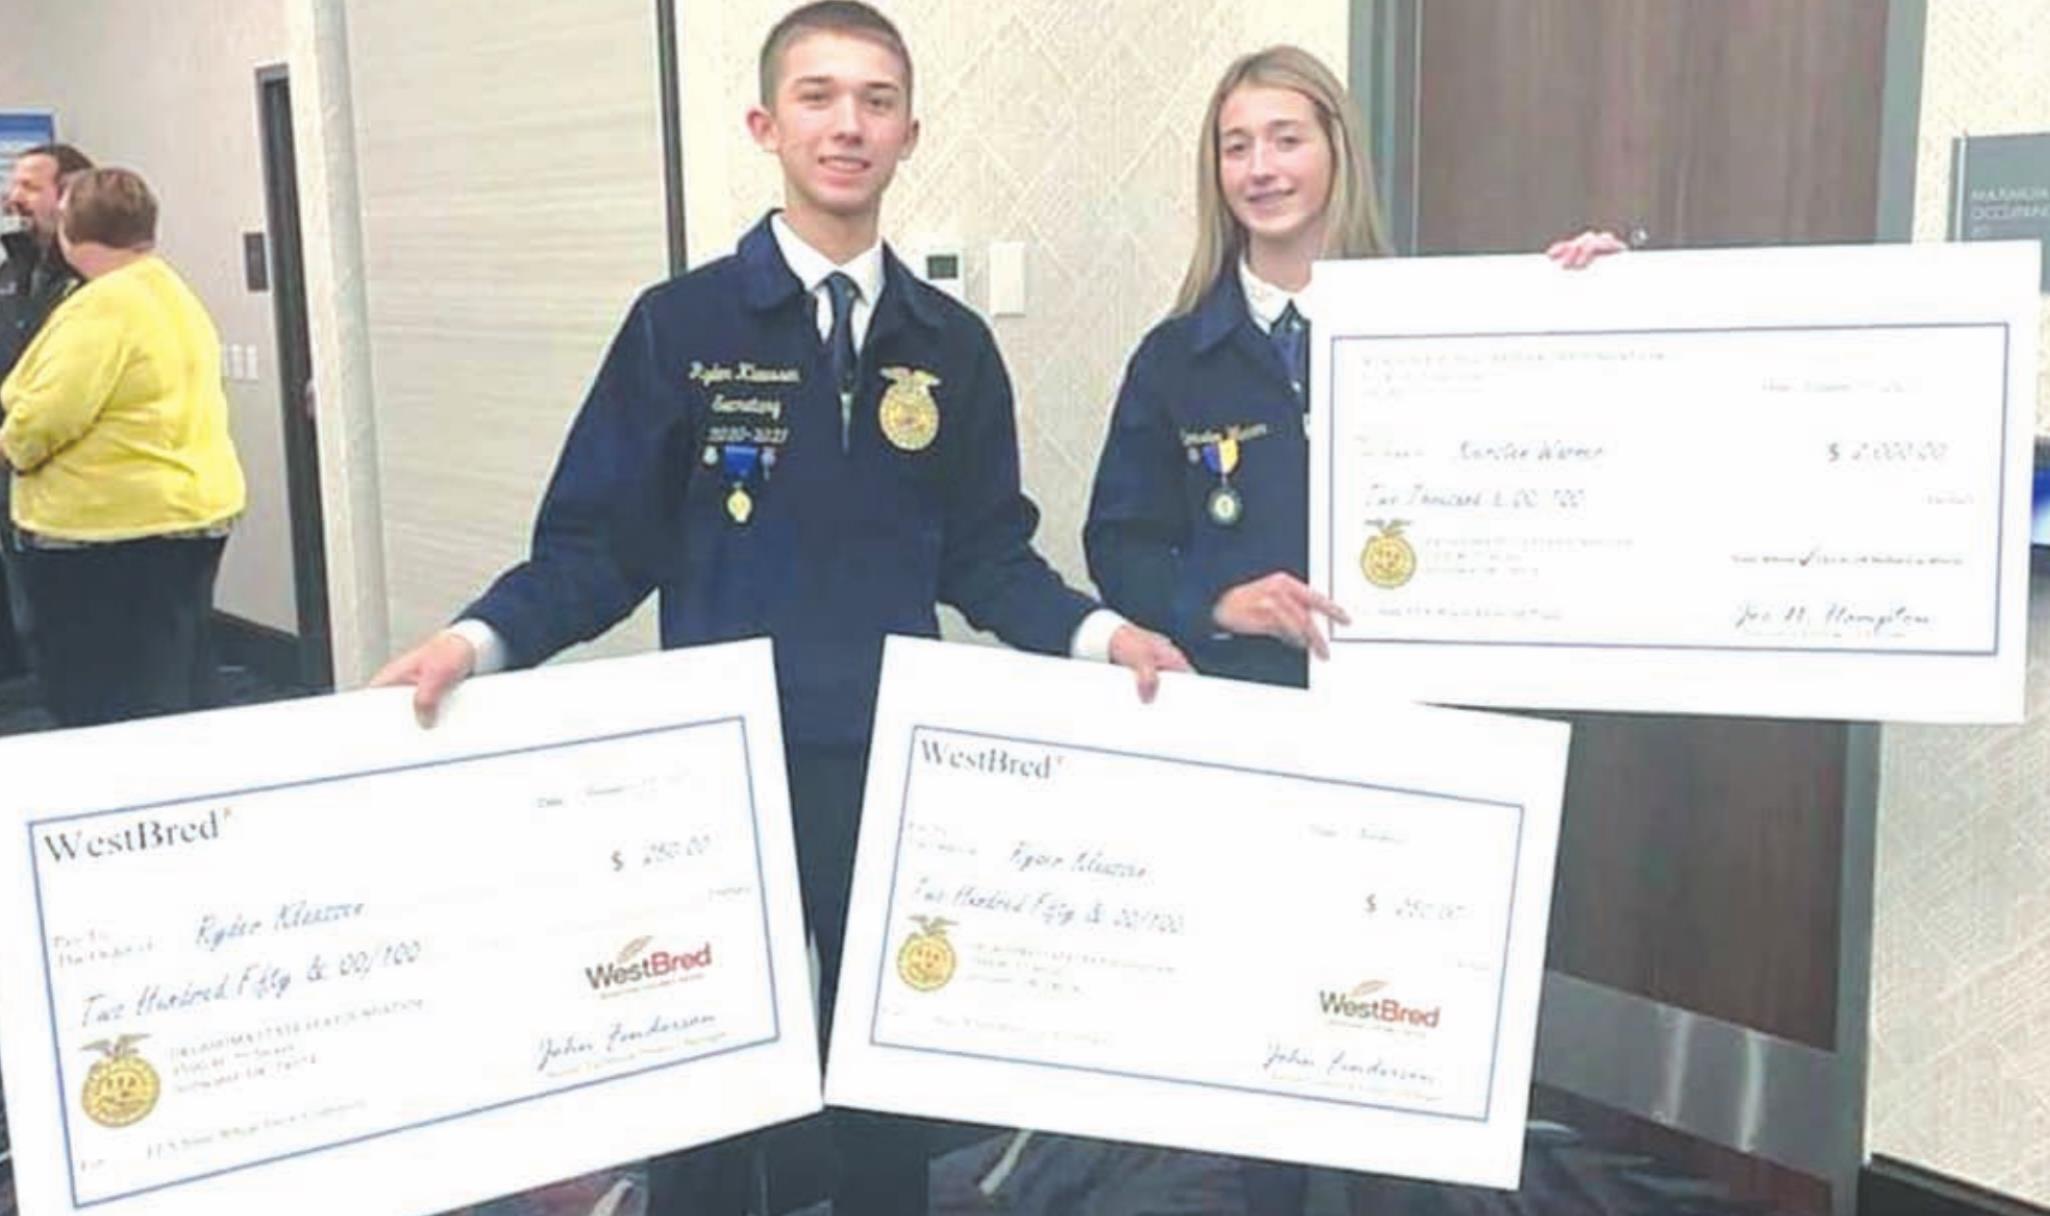 Hydro-Eakly FFA members Ryder Klaassen and Kiersten Warner were in the Top 5 overall scholarship winners at the Oklahoma State Wheat Show. Kiersten won a $2,000 scholarship and Ryer was named overall Grand Champion. Provided